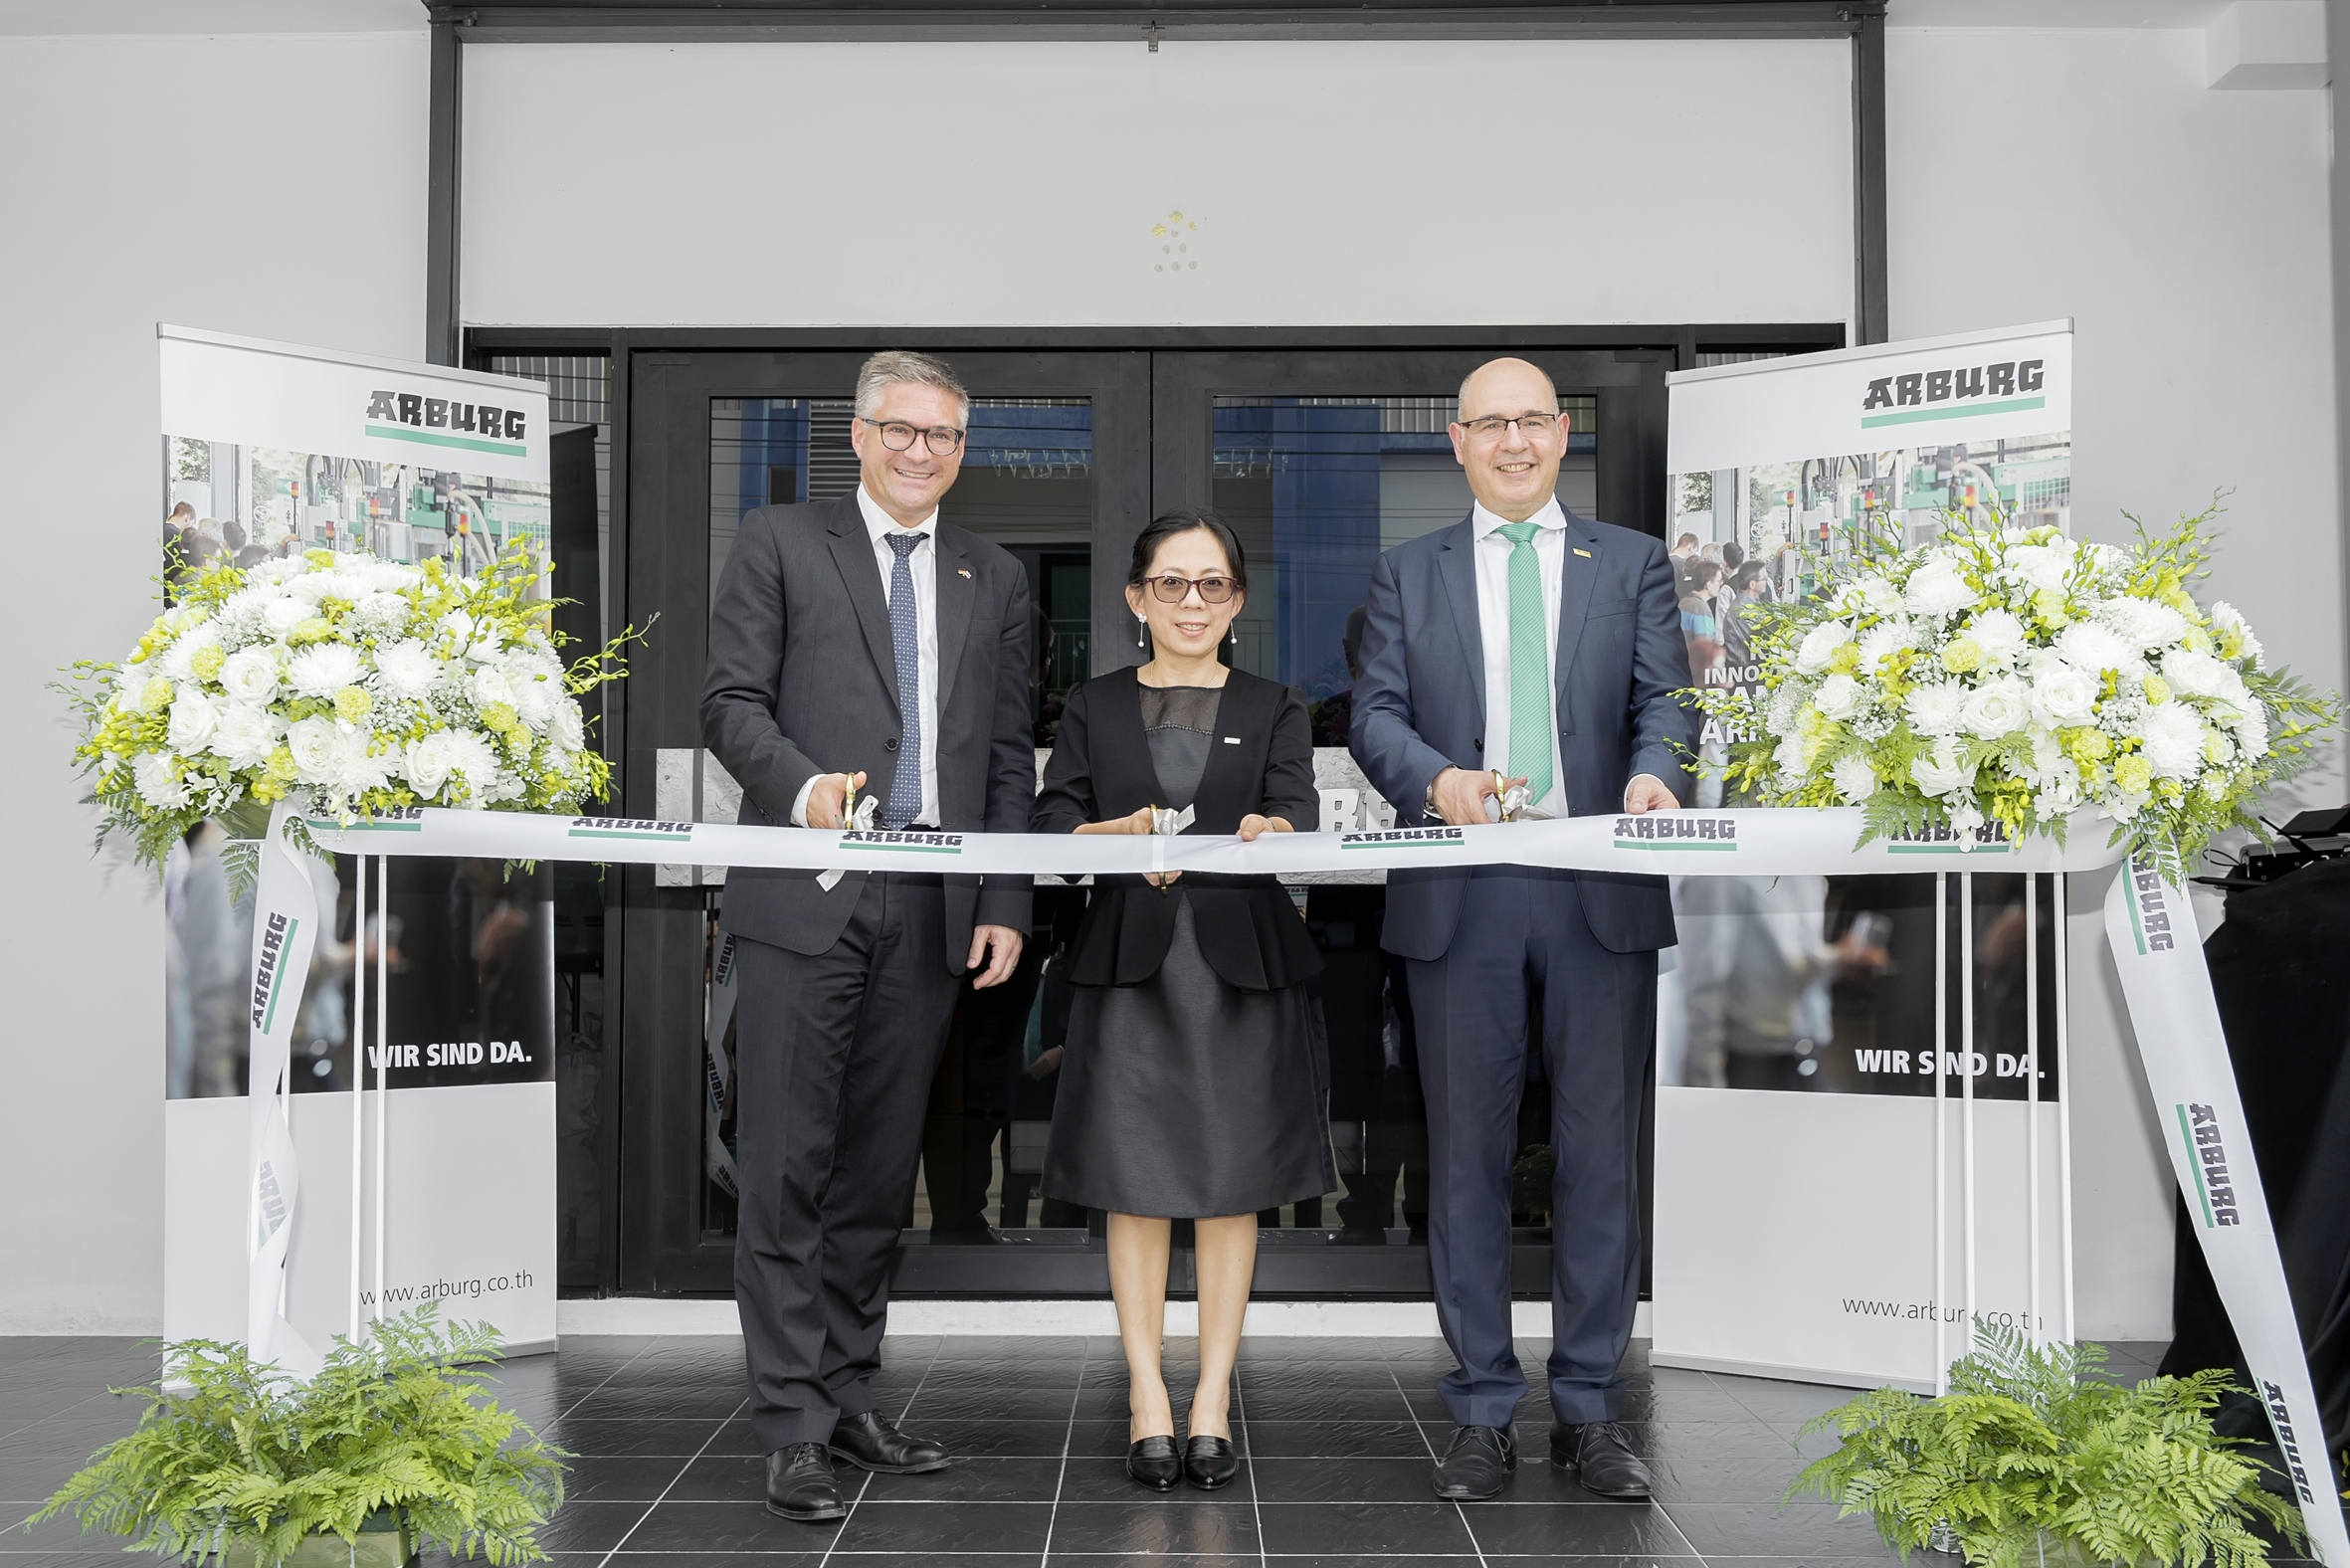 Inauguration of the new Arburg premises. From right: Andrea Carta, Ratree Boonsay and Dr Alexander Raubold, counsellor economic and commercial affairs of the German embassy in Bangkok. (Photo courtesy Arburg.)